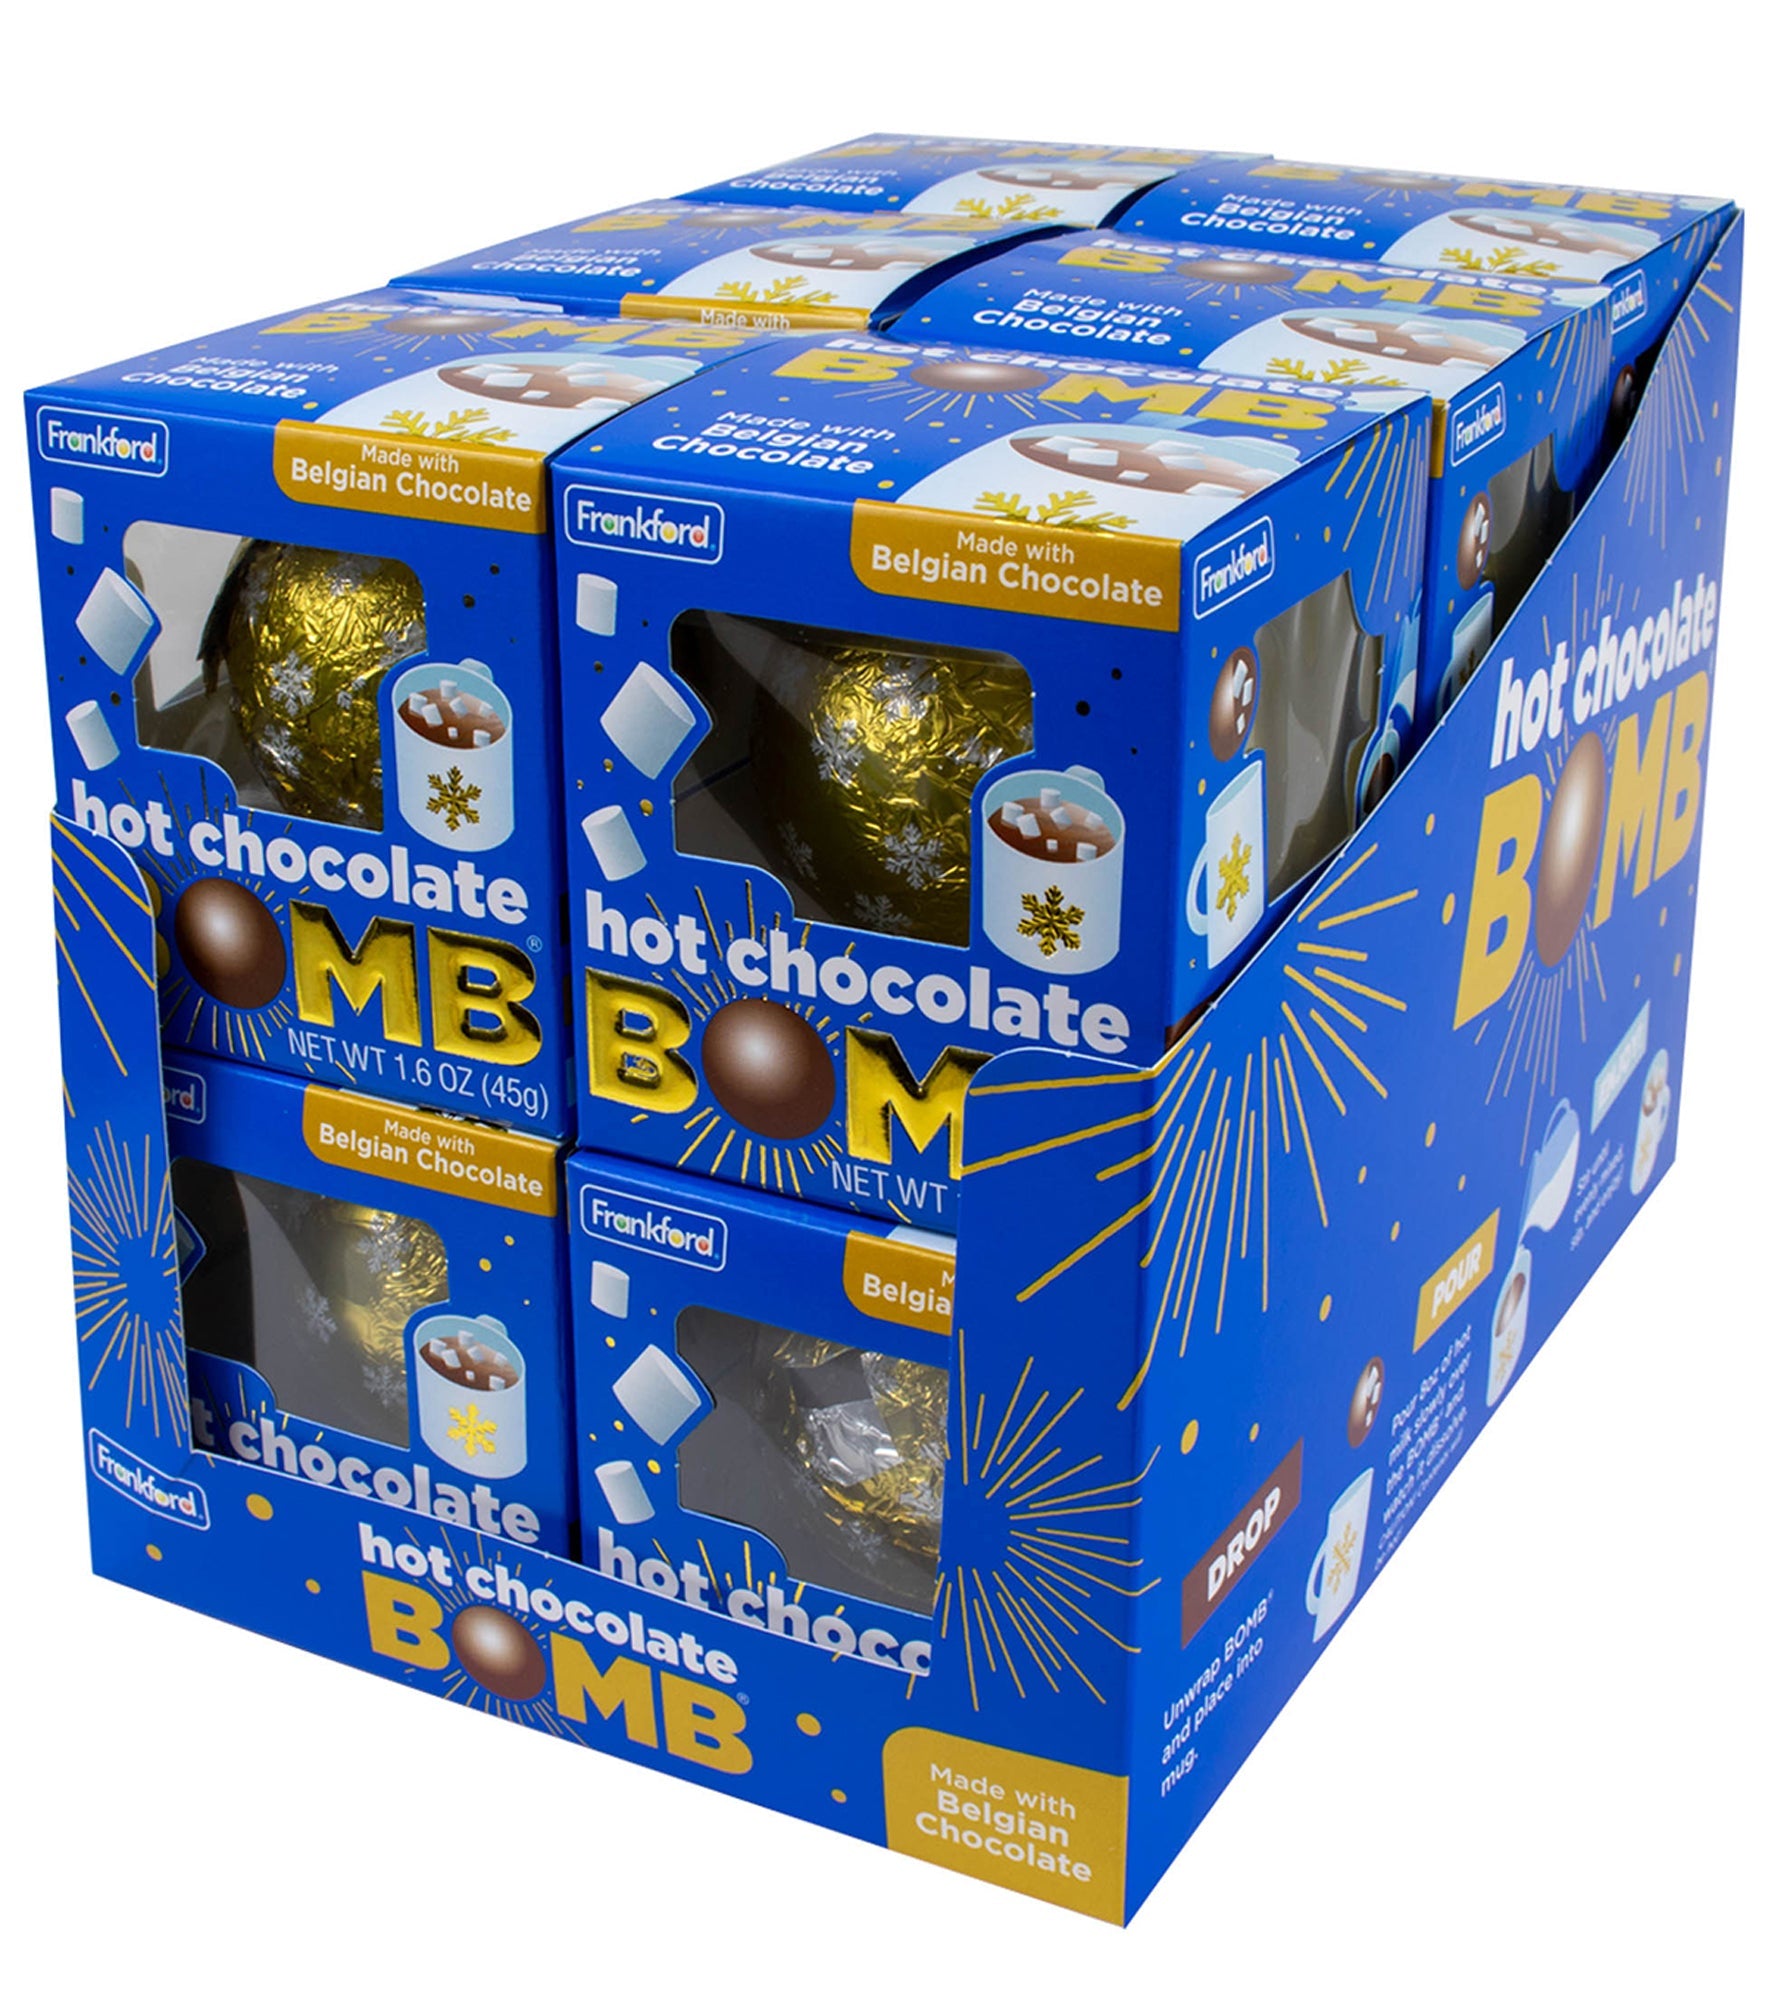 Blue display case of 6 individual blue boxes of hot chocolate bombs